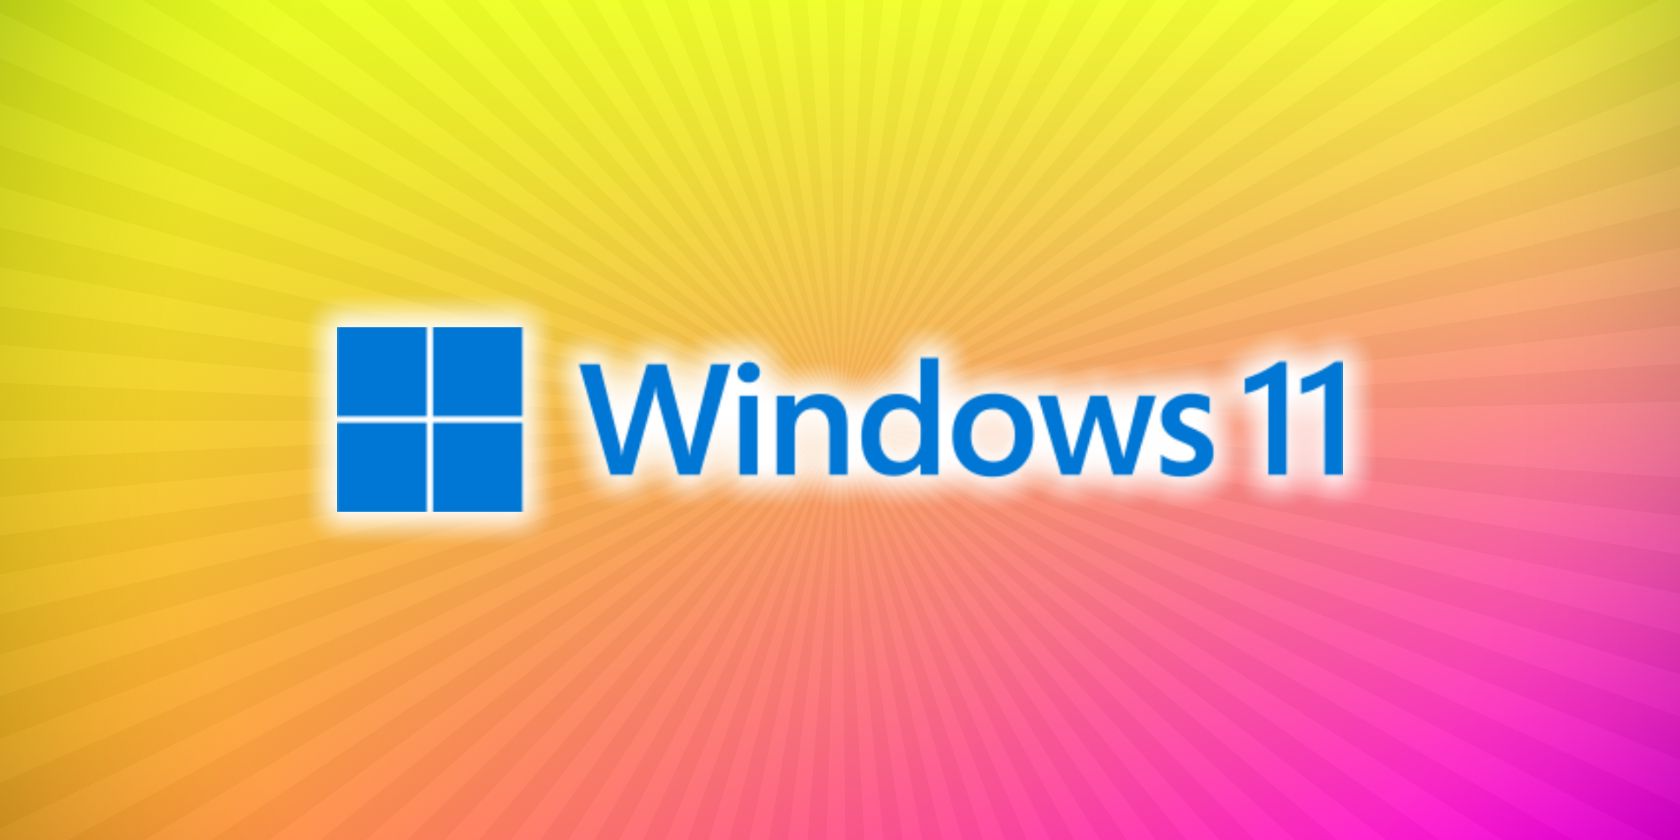 upgrade to windows 11 for free